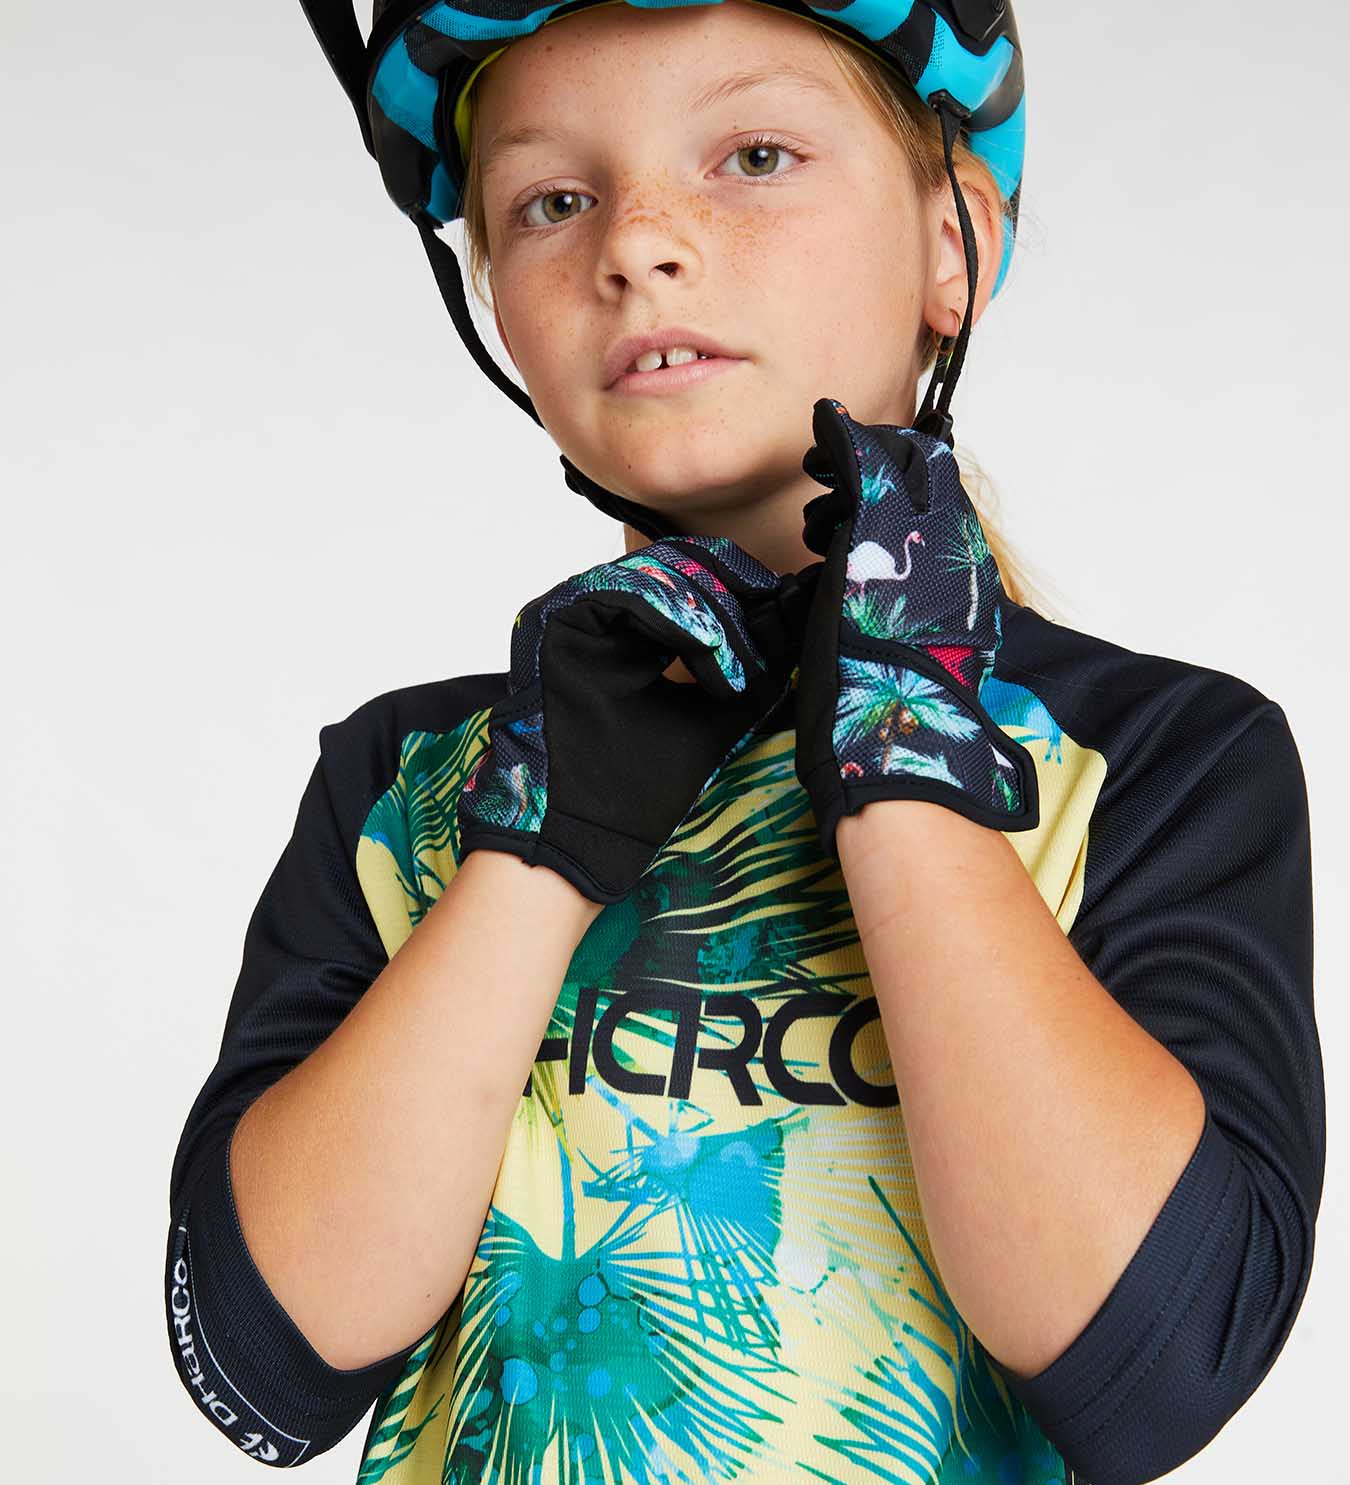 Youth Gloves | Party